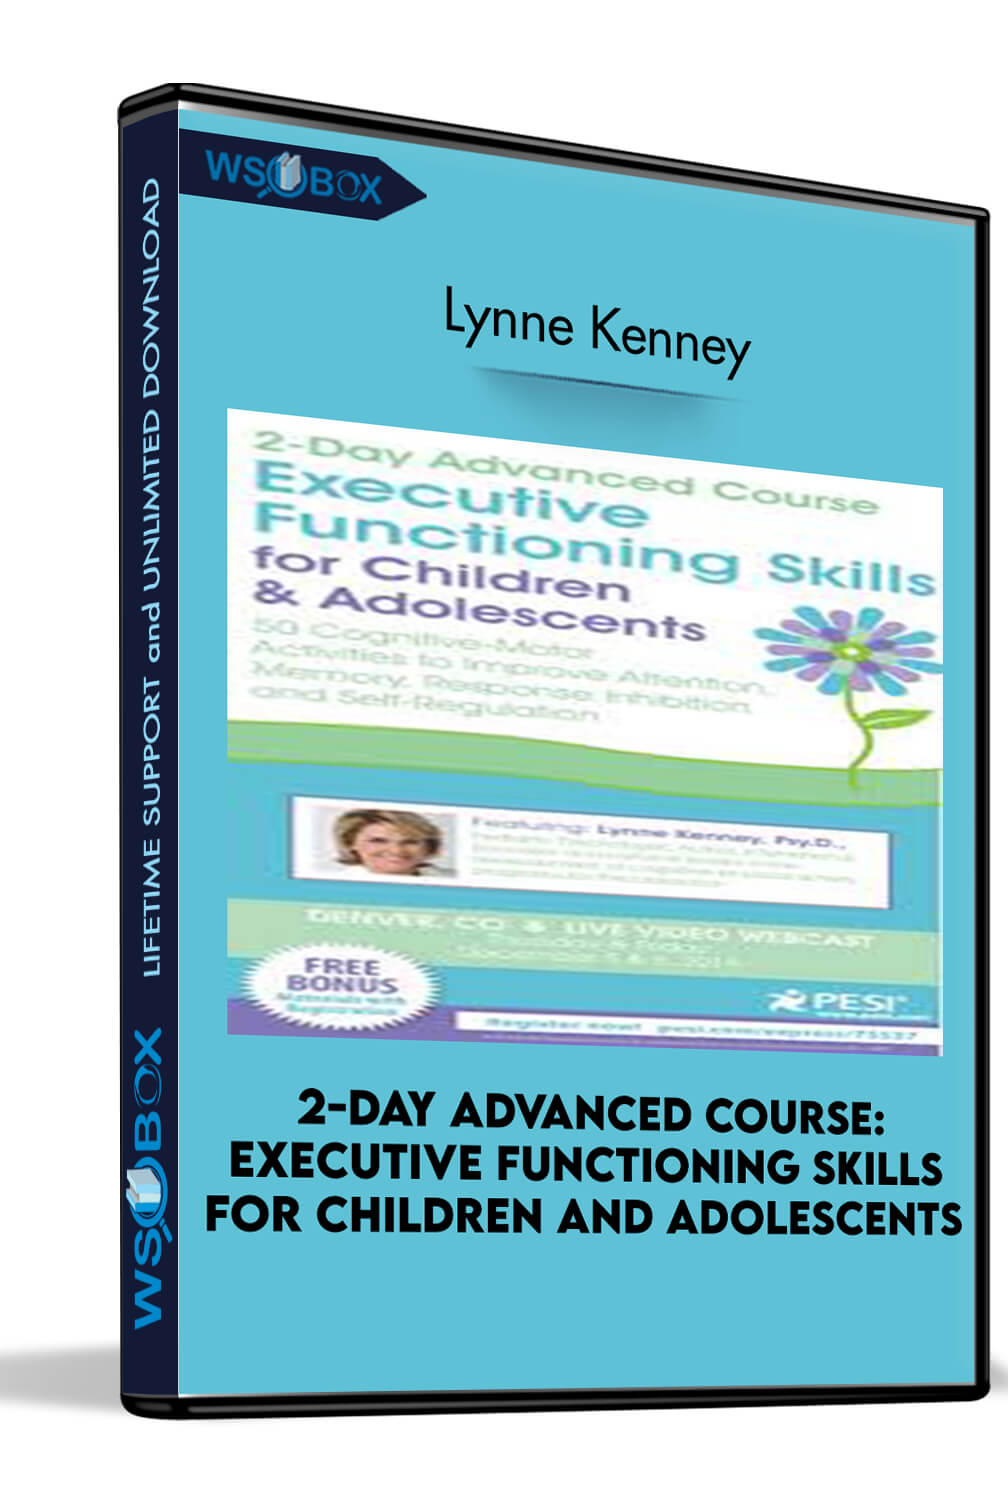 2-Day Advanced Course: Executive Functioning Skills for Children and Adolescents: 50 Cognitive-Motor Activities to Improve Attention, Memory, Response Inhibition and Self-Regulation – Lynne Kenney